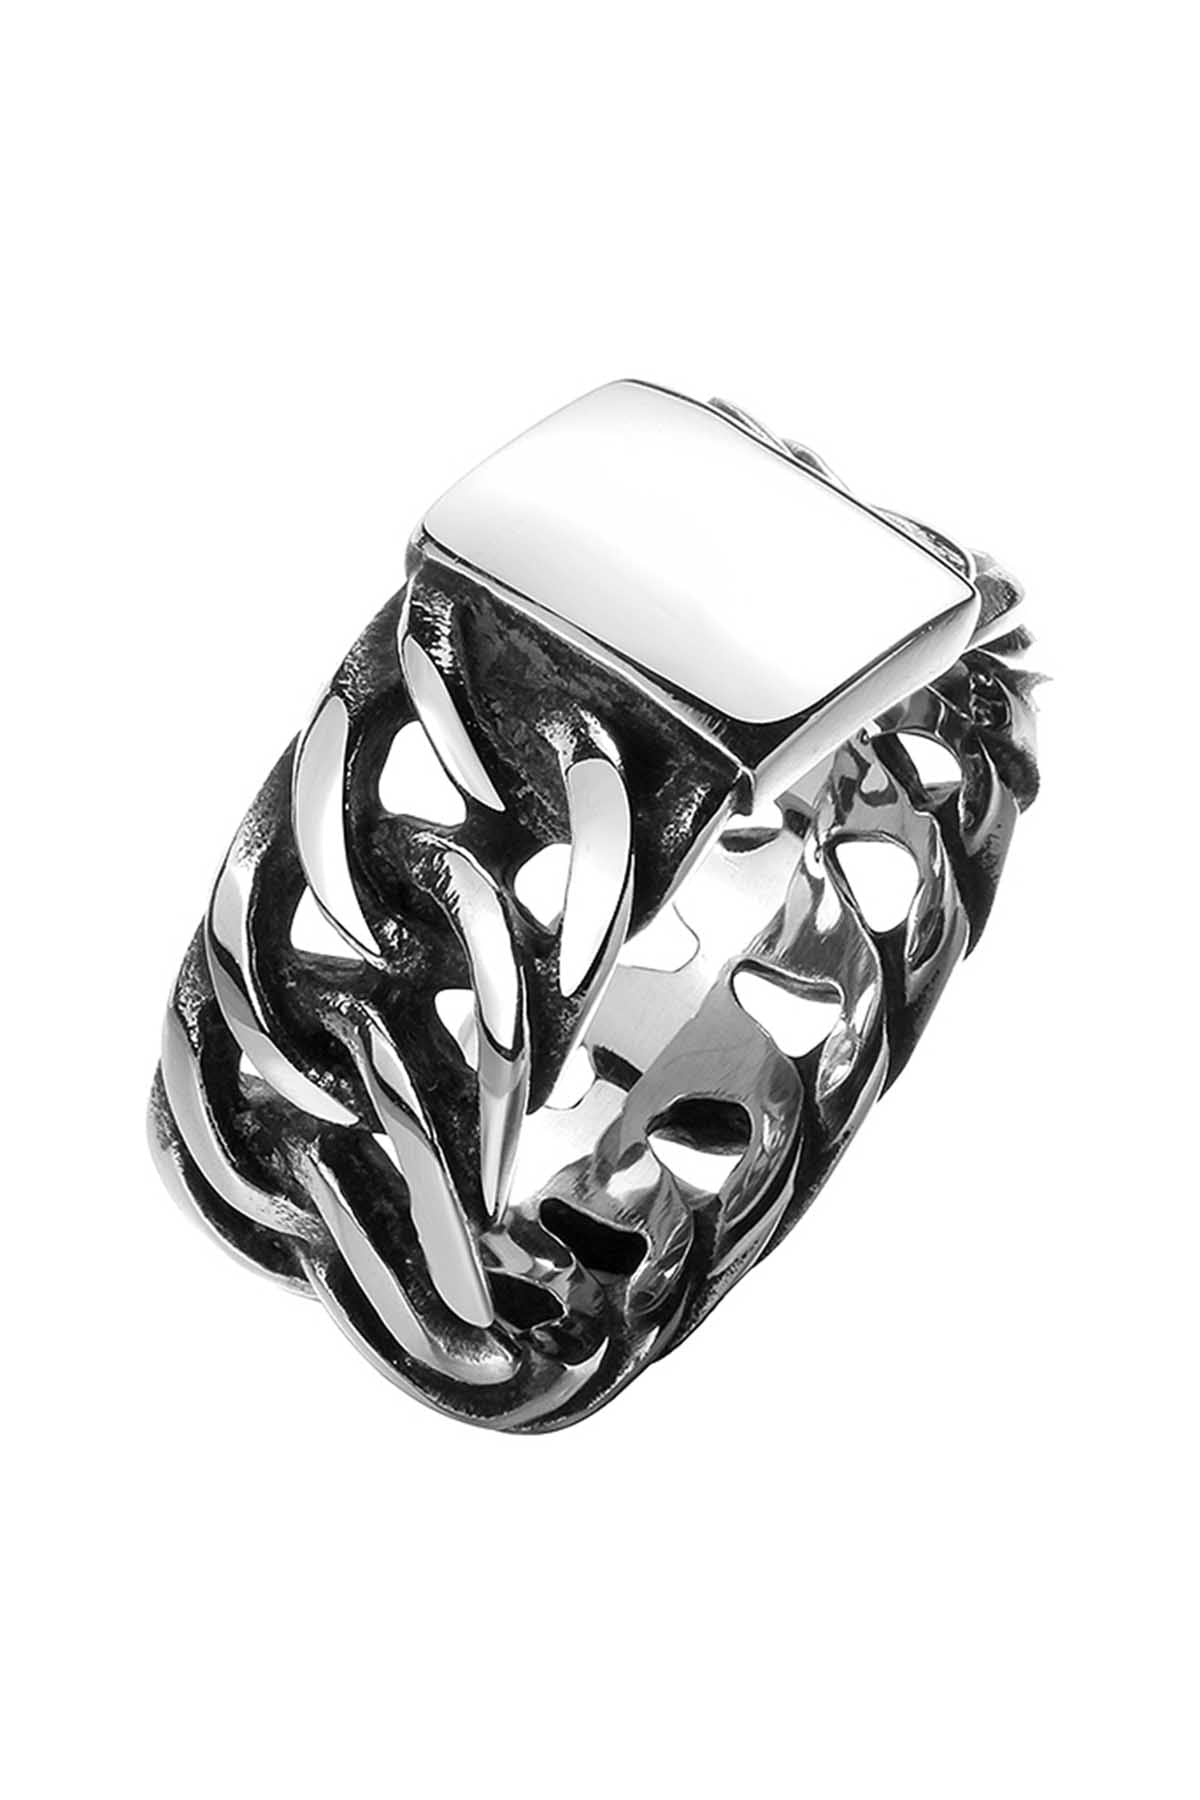 Gomaya Silver Chain & Plate Stainless Steel Ring